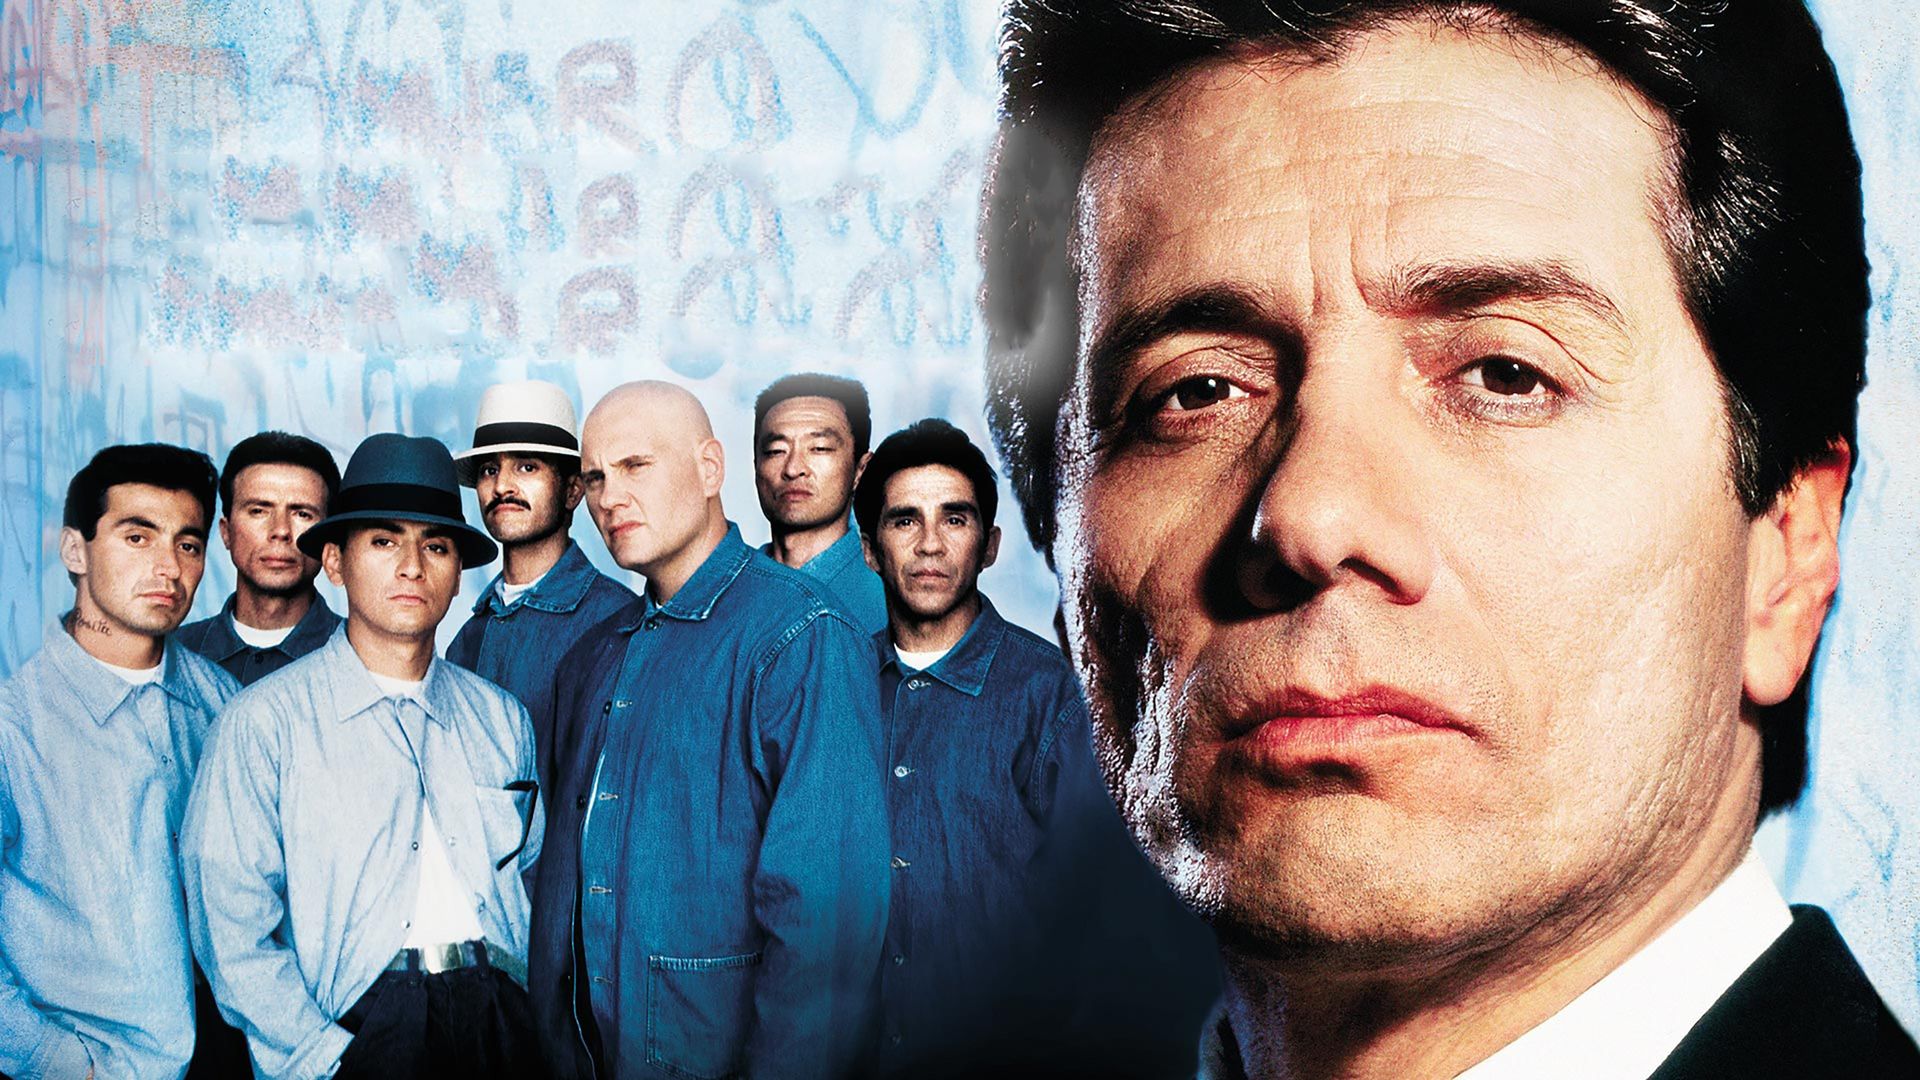 American Me background